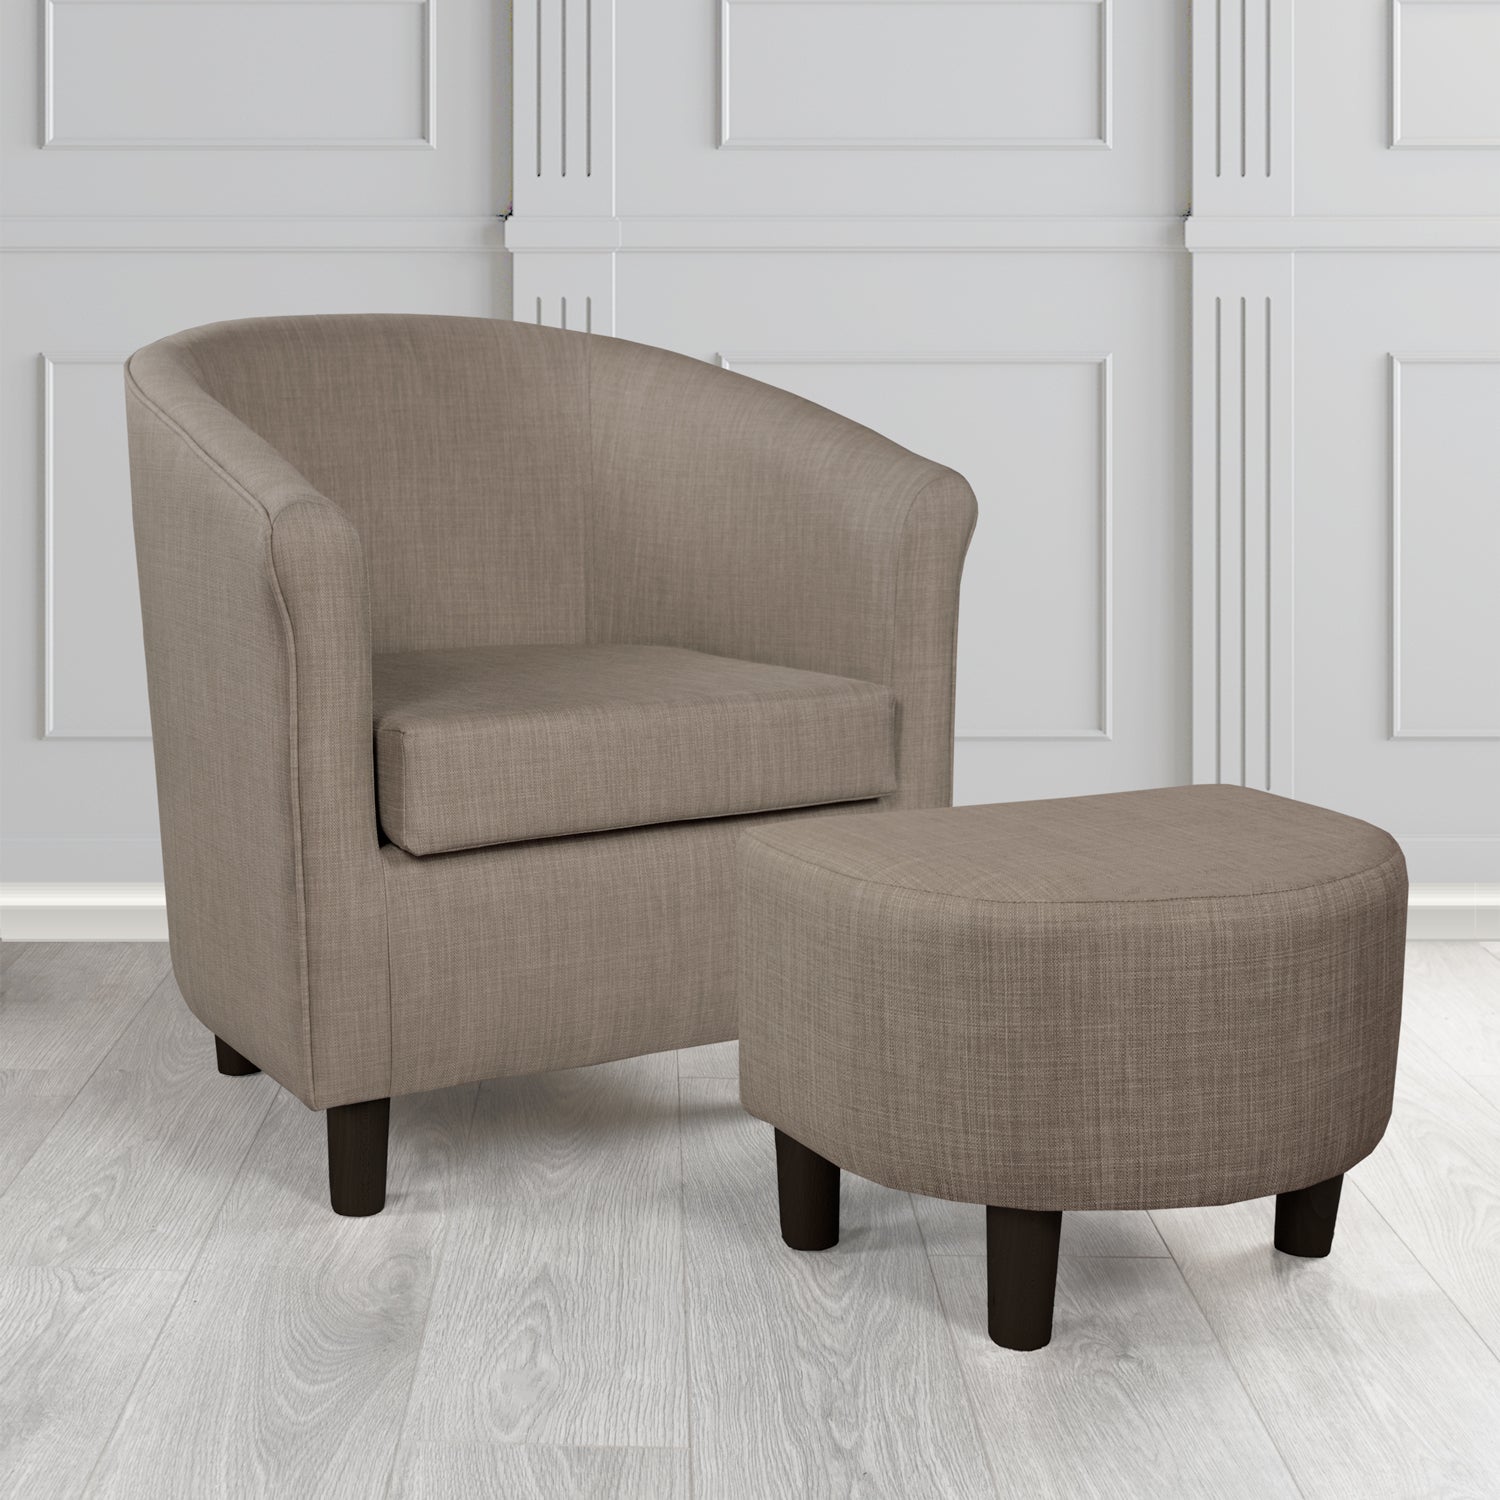 Tuscany Charles Slate Linen Plain Fabric Tub Chair with Dee Footstool Set - The Tub Chair Shop